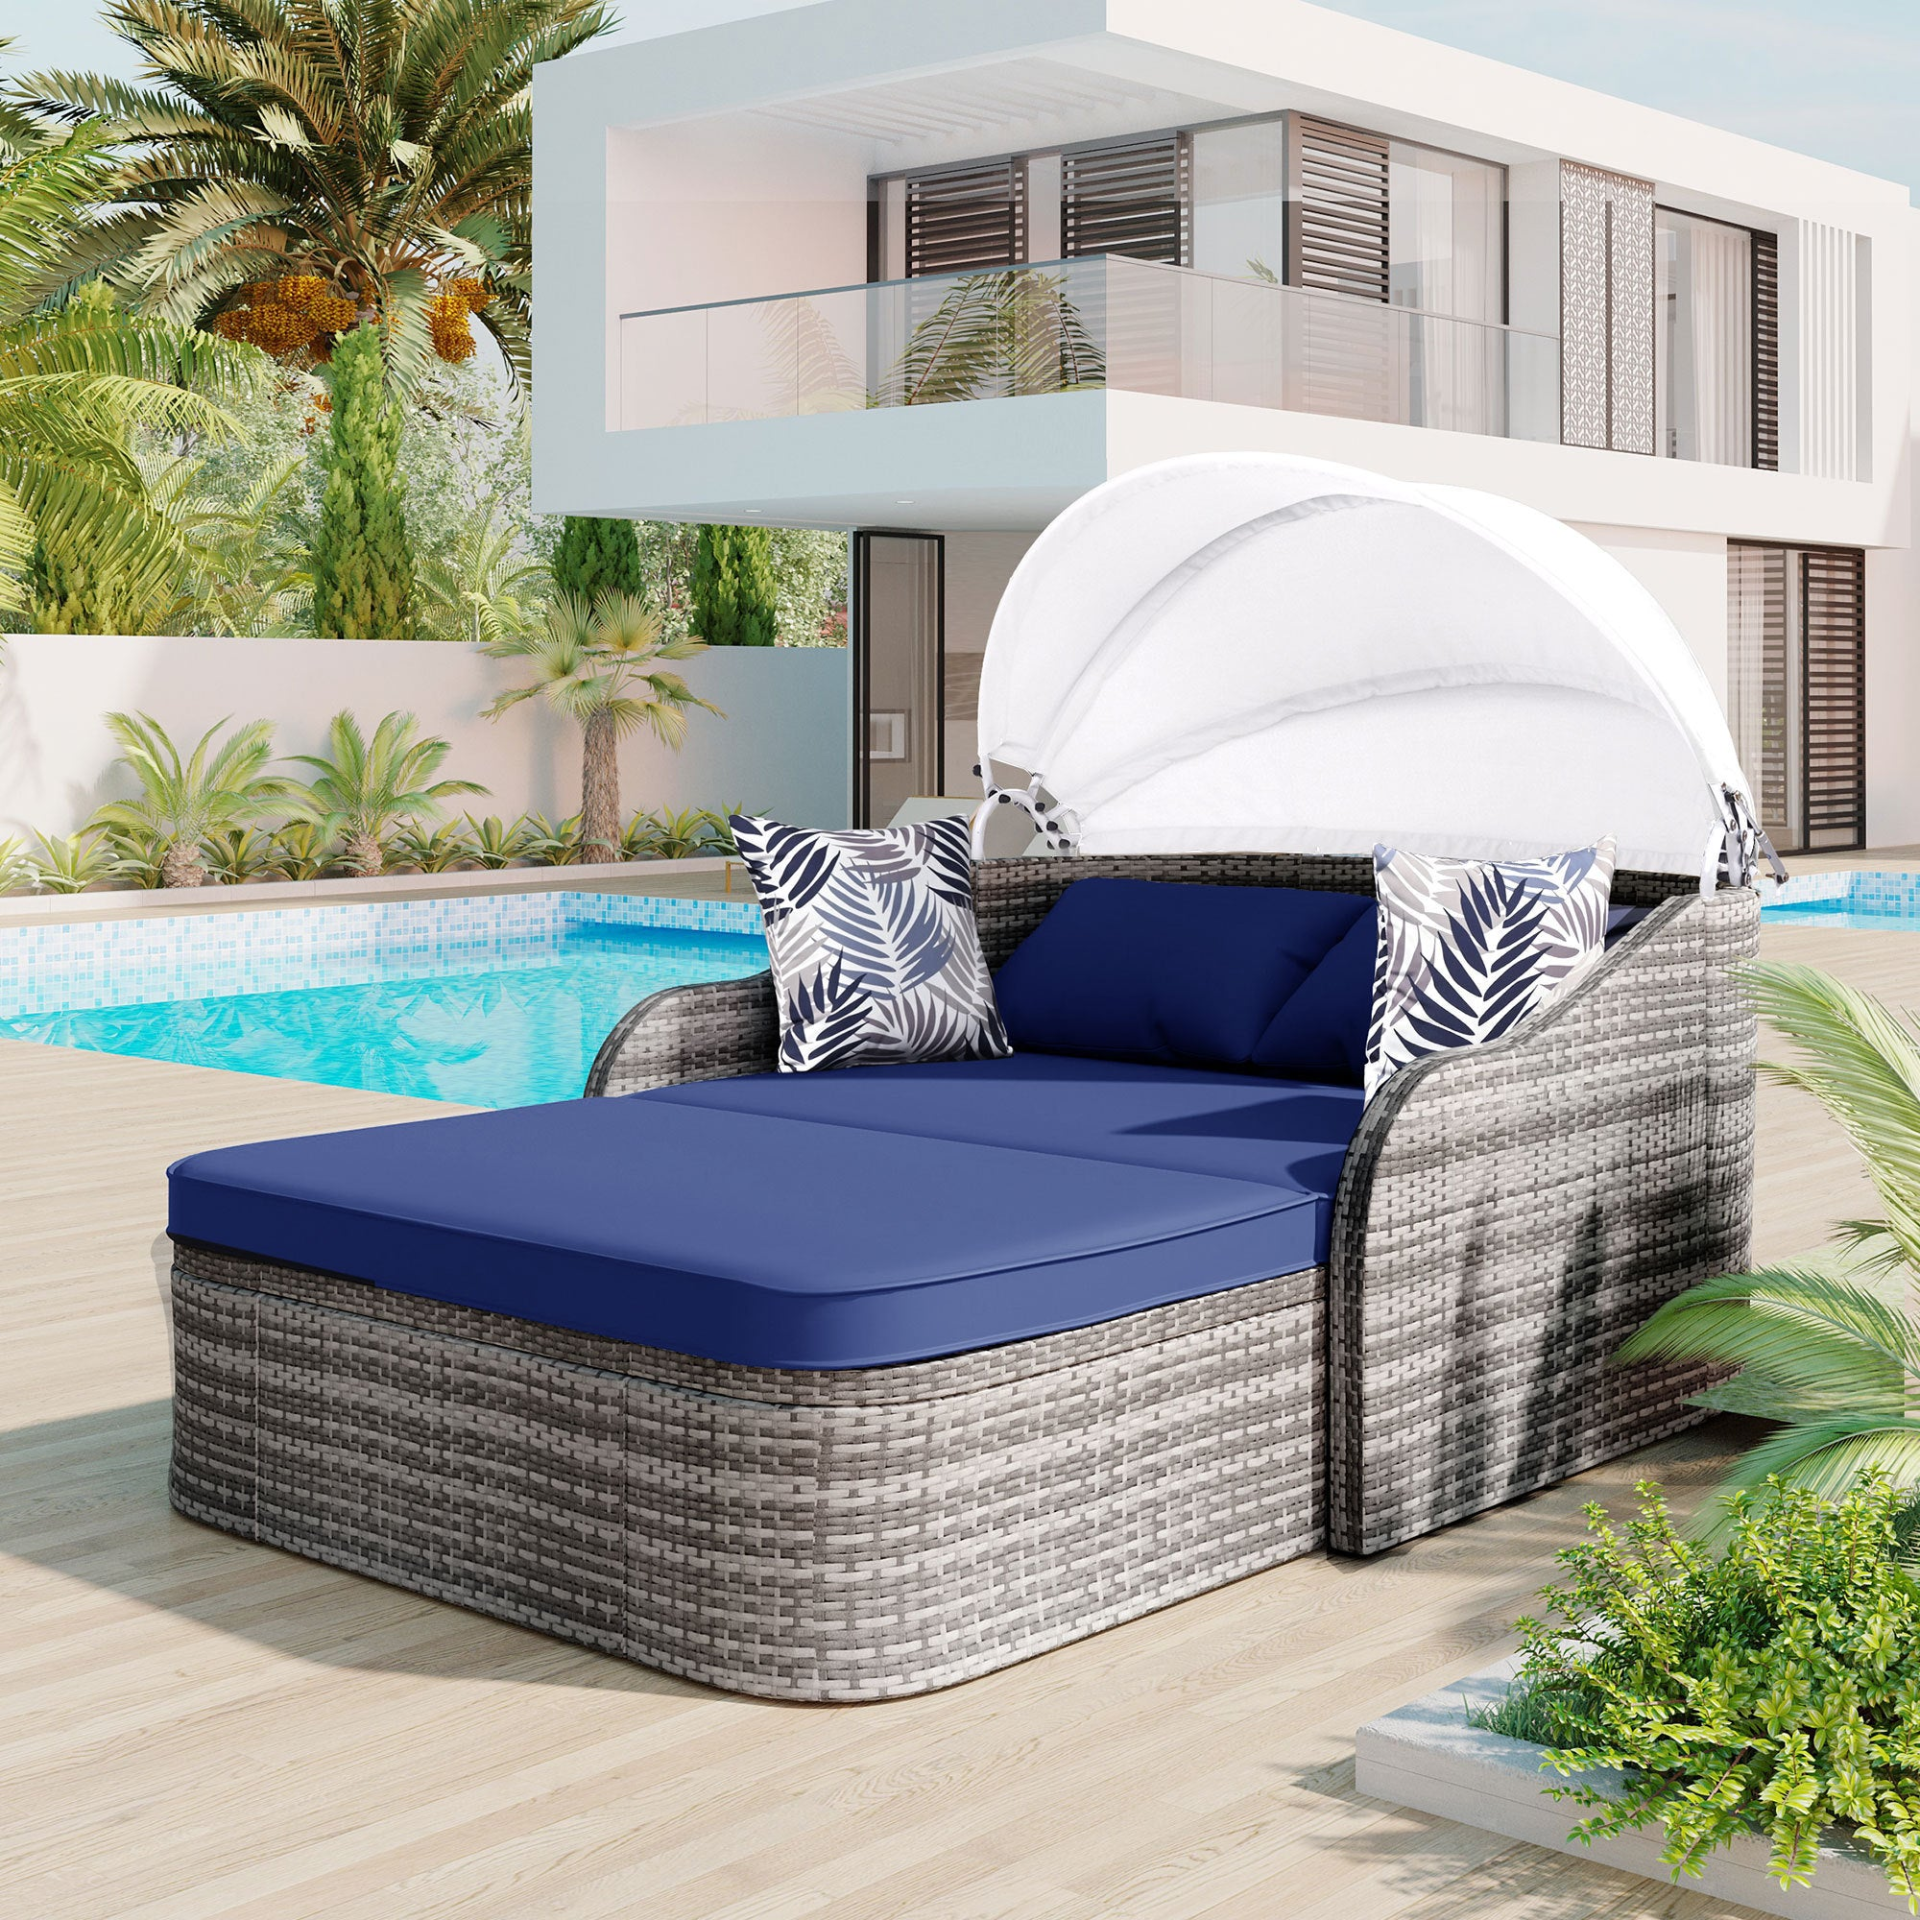 79.9" Outdoor Sunbed with Adjustable Canopy, Daybed With Pillows, Double lounge, PE Rattan Daybed, Gray Wicker And Blue Cushion